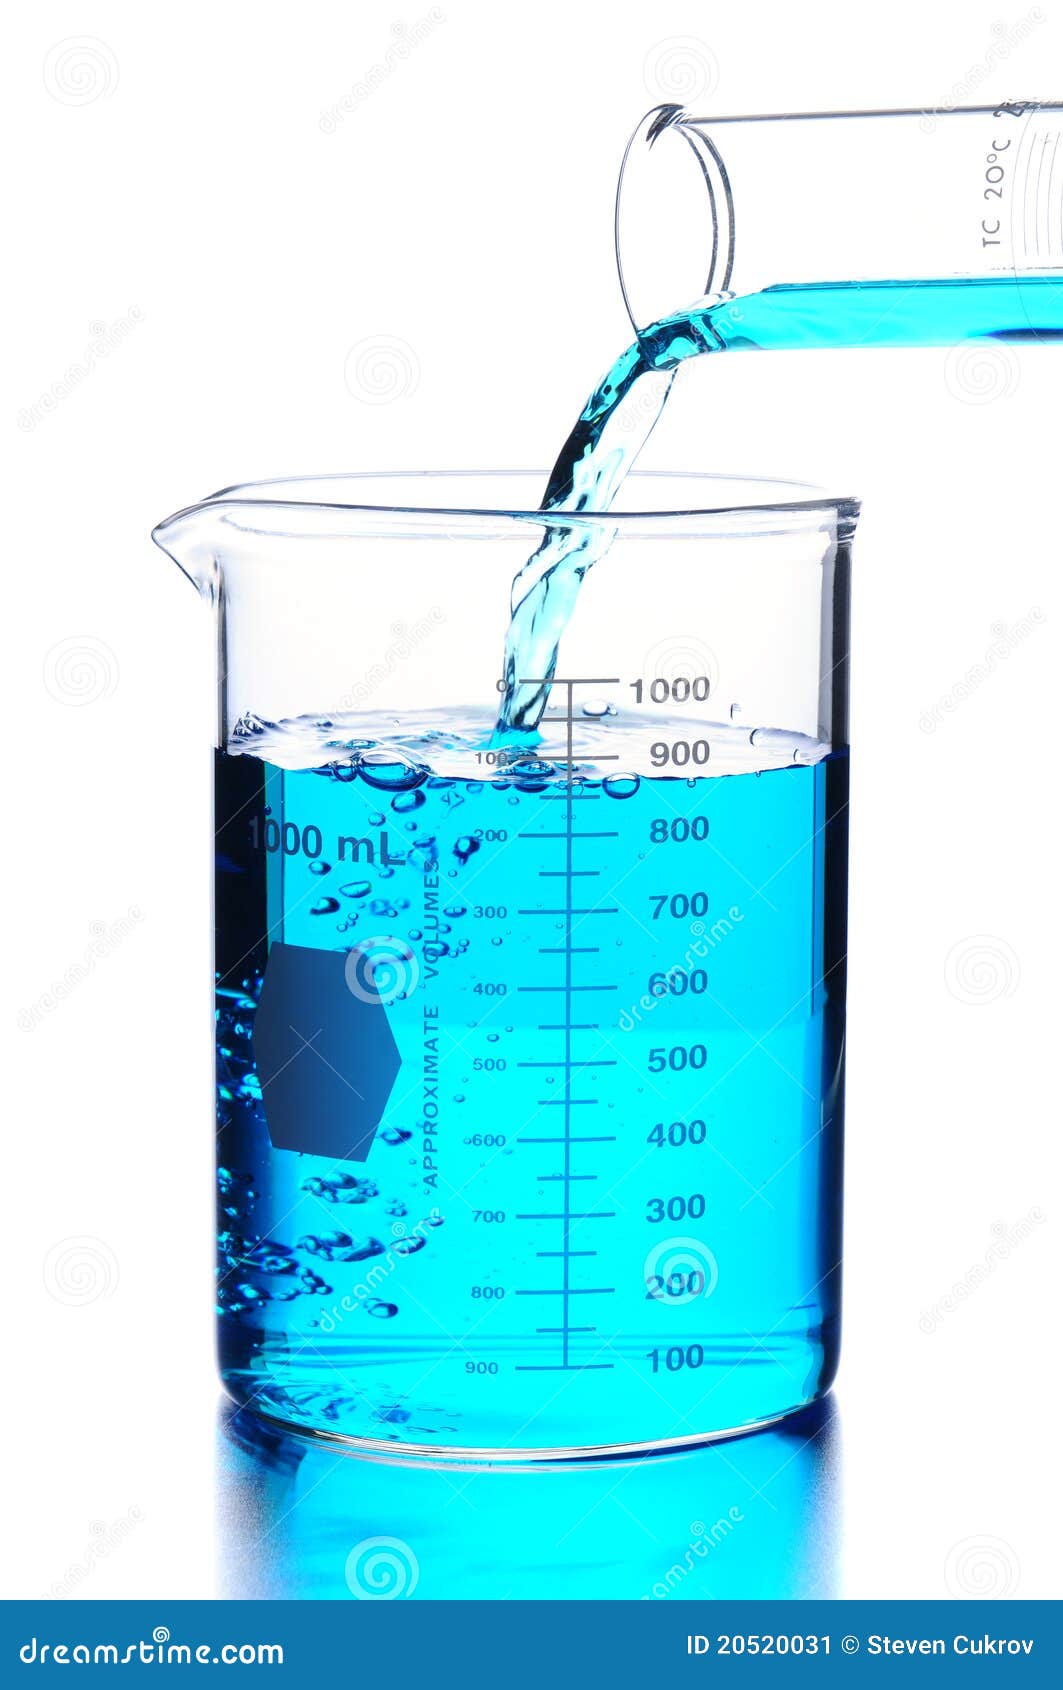 Liquid Pouring Into A Lab Beaker Stock Image - Image: 20520031